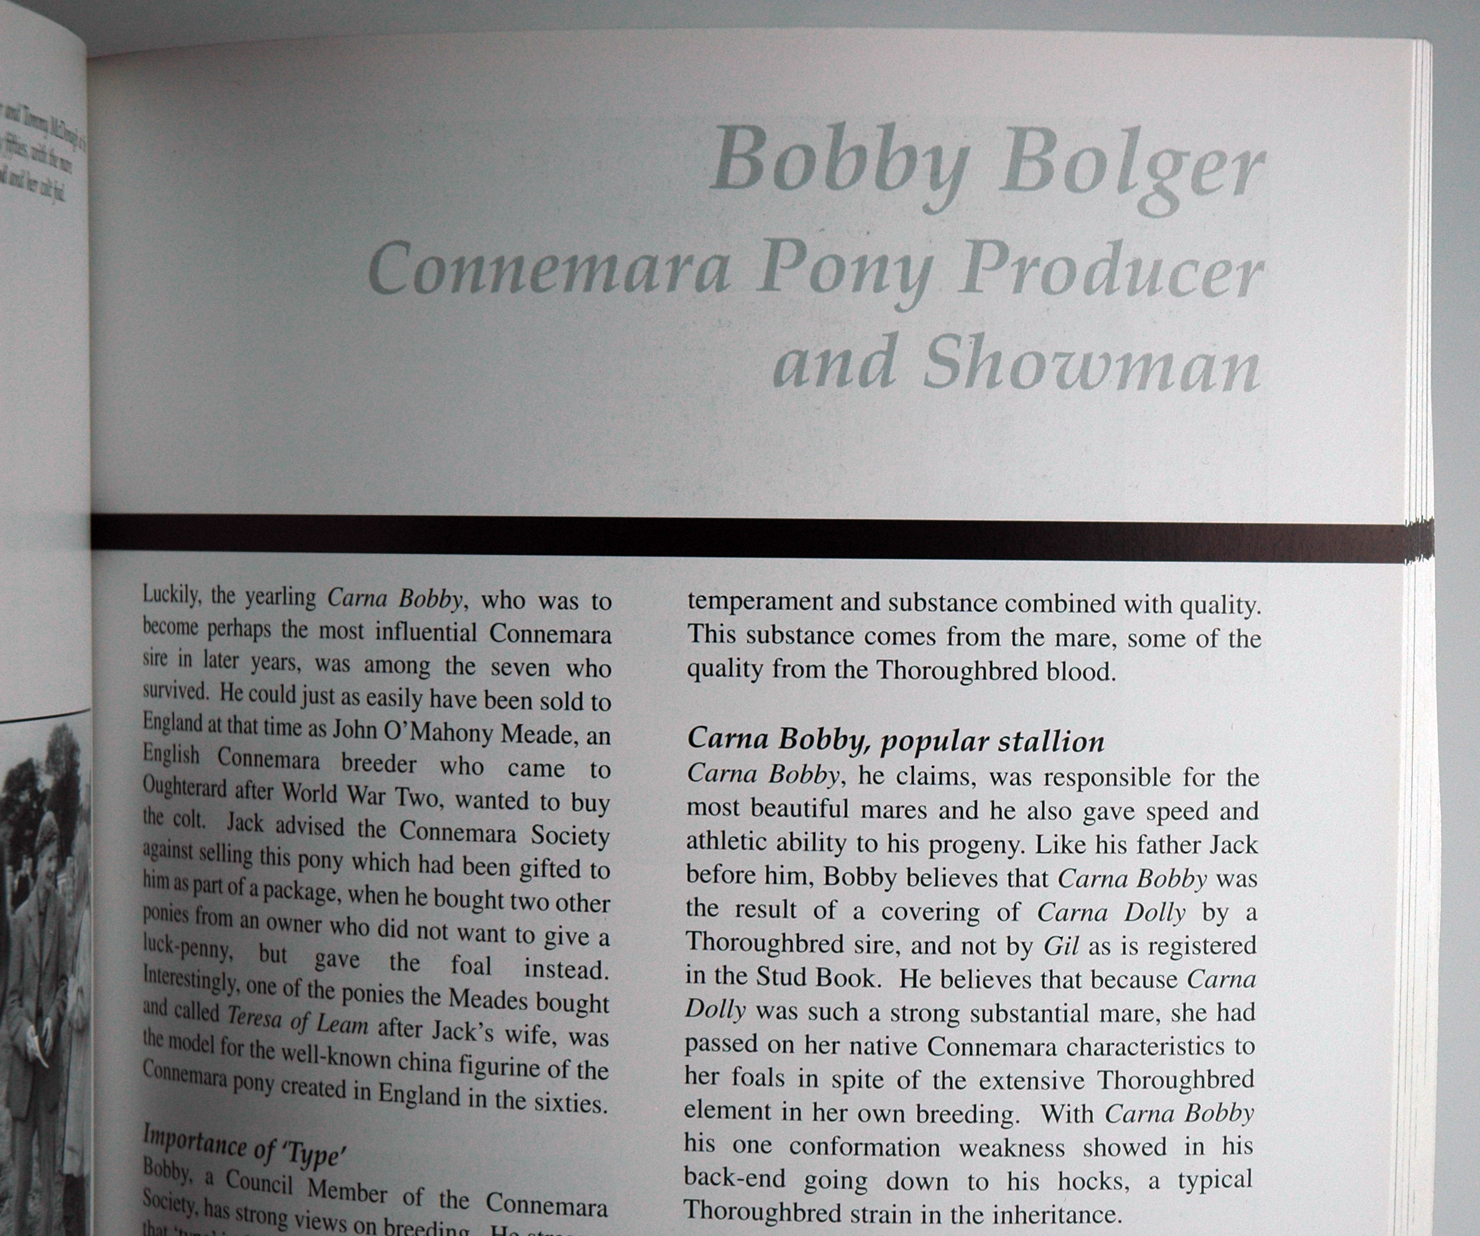 Stallion Carna Bobby is three quarters Thoroughbred, according to Bobby Bolger, whose father bred the stallion